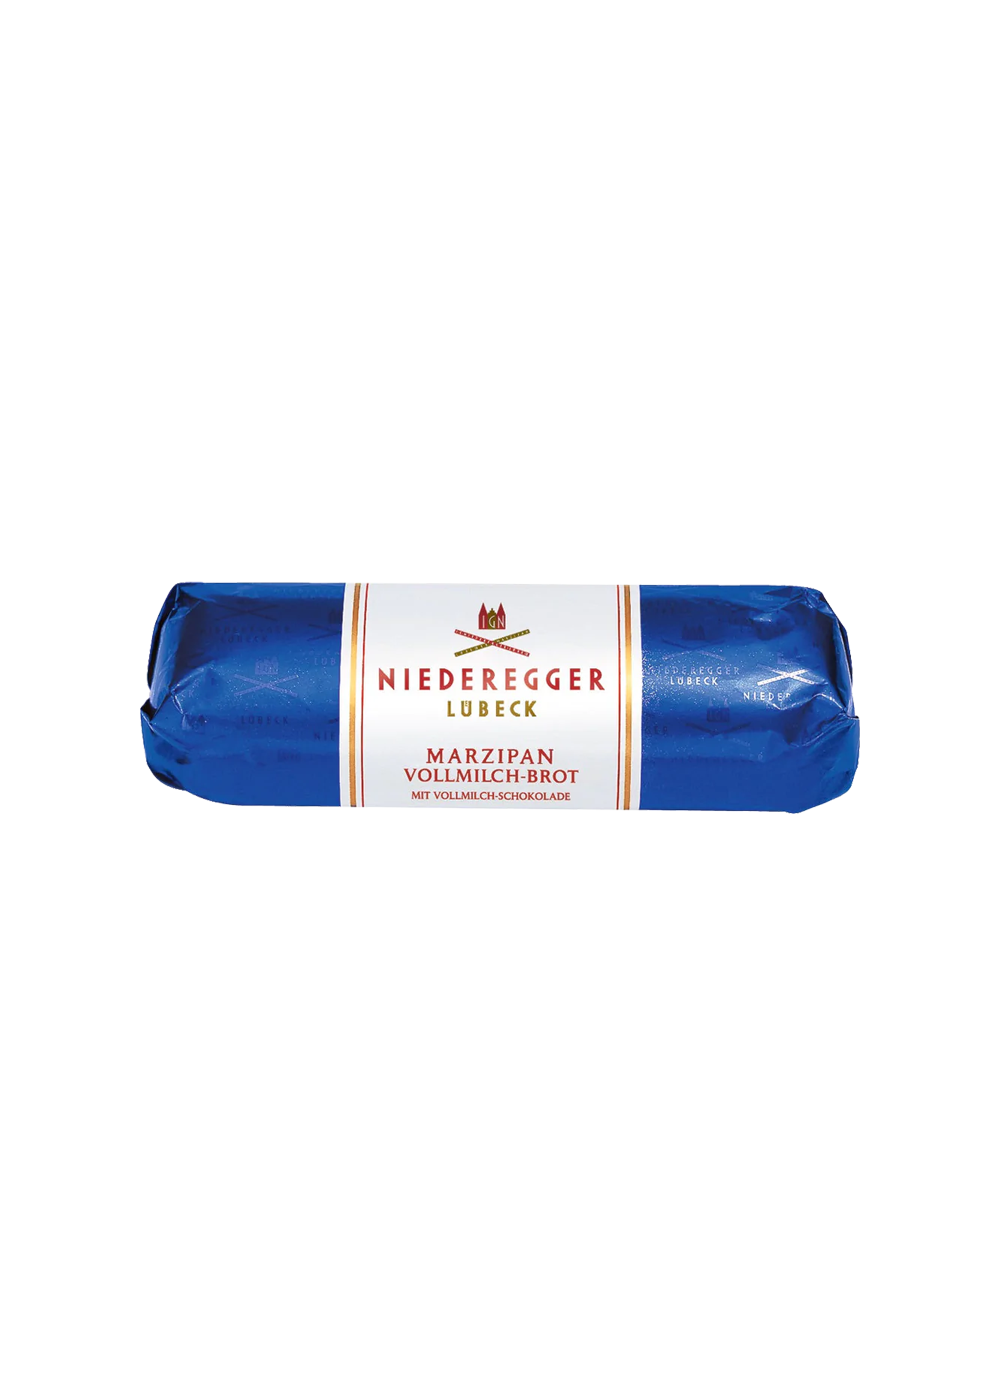 Niederegger Lubeck Marzipan Milk Chocolate Covered Loaf 125g